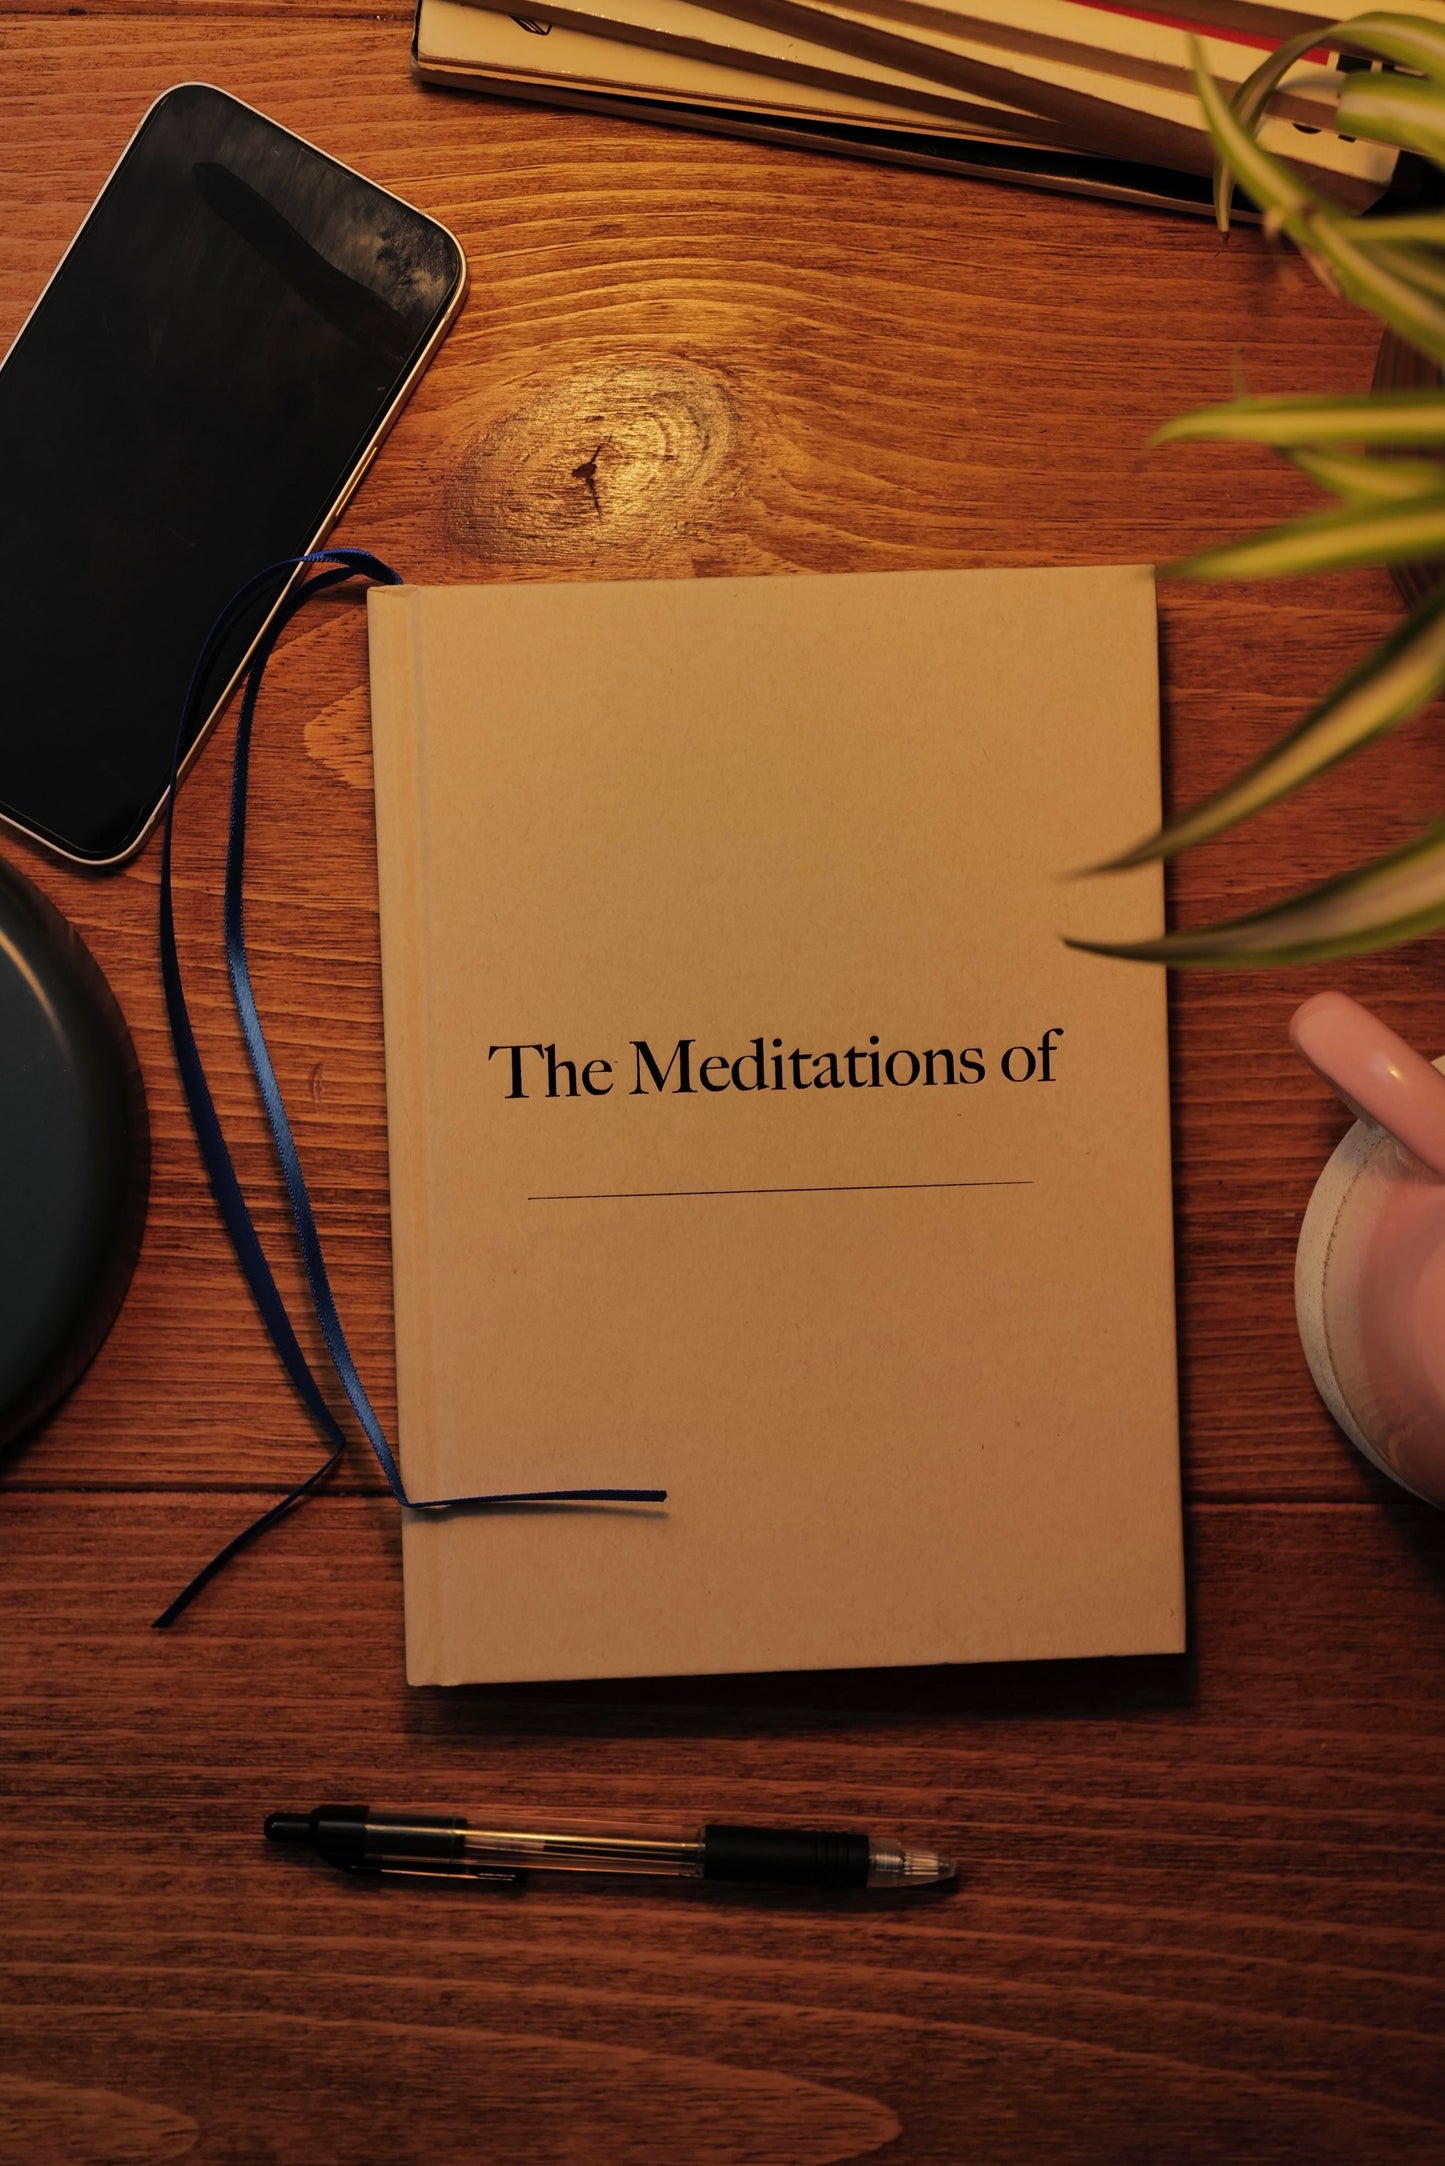 "THE MEDITATIONS OF" Official Thoughts Journal by The Everyday Stoic